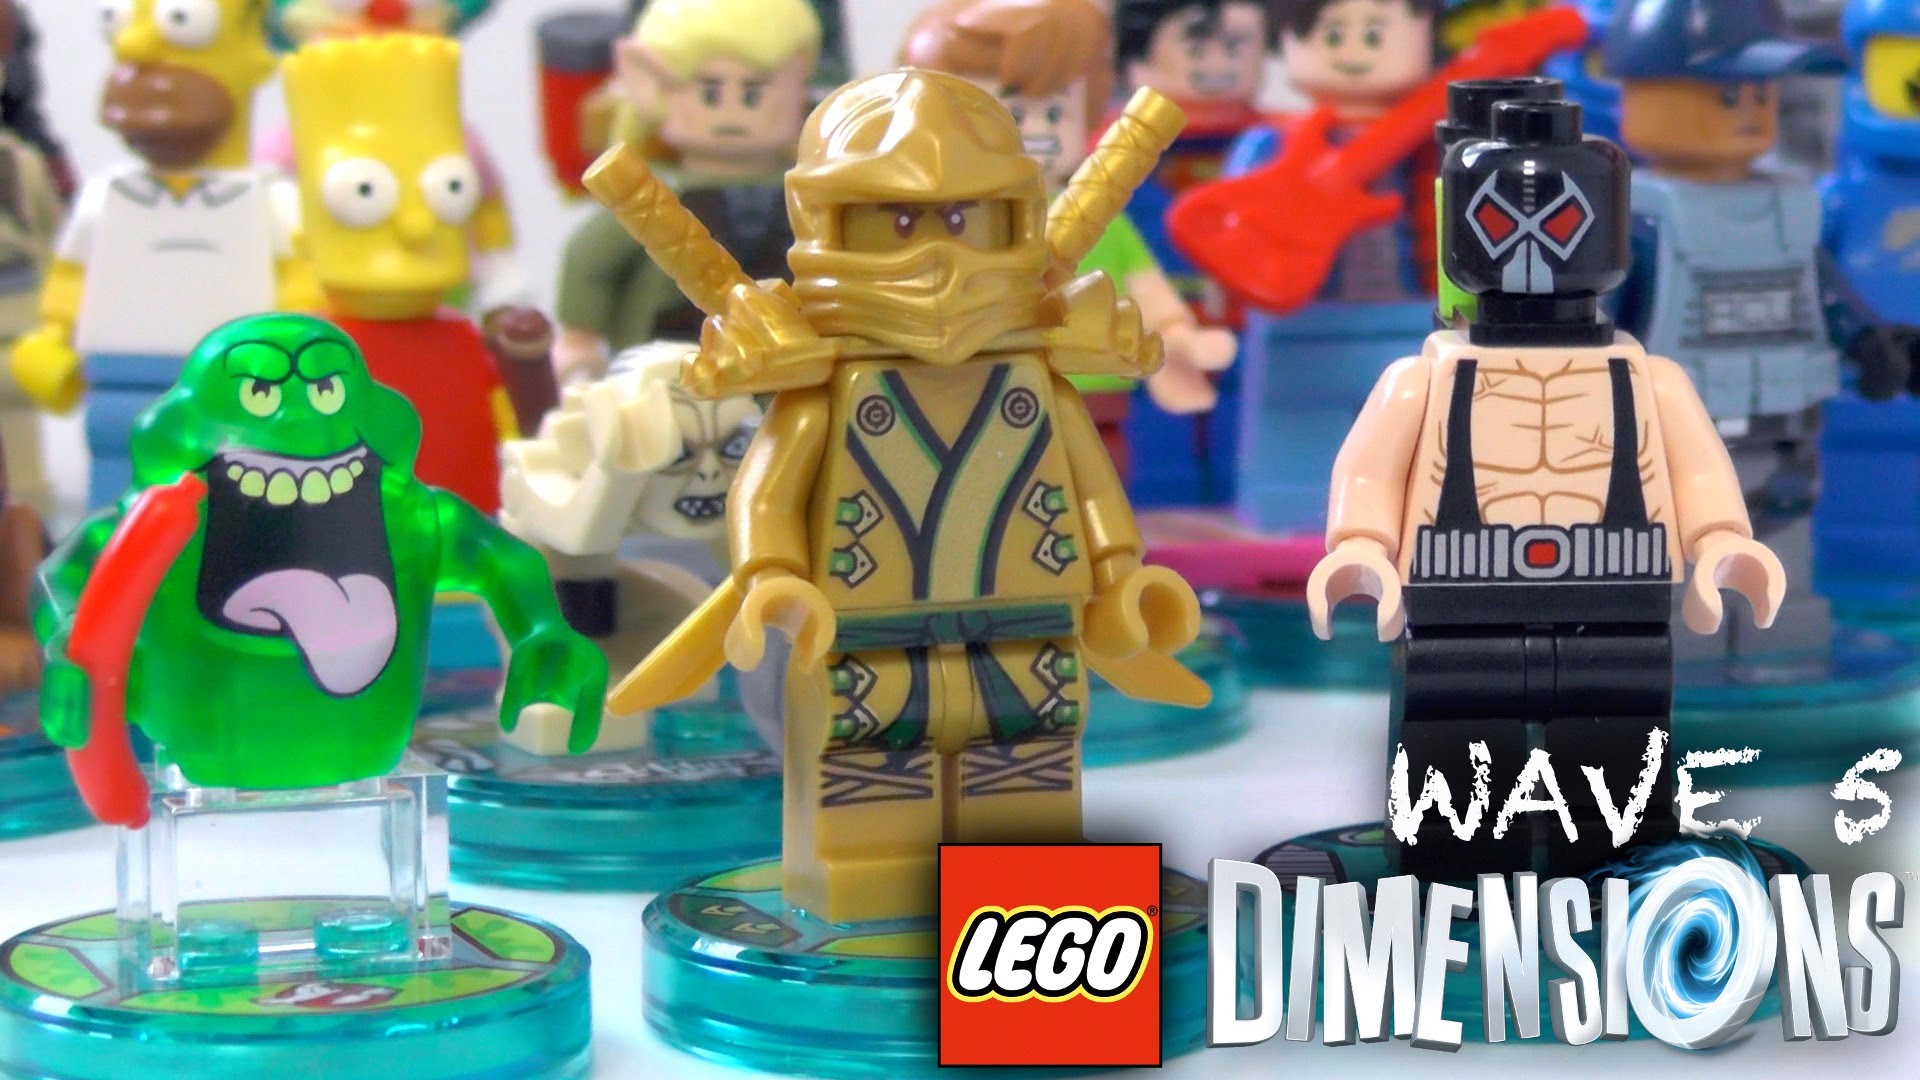 Lego Dimensions Wave 5 – Complete Minifigure Collection (w/ Disney Infinity Cancellation Thoughts)